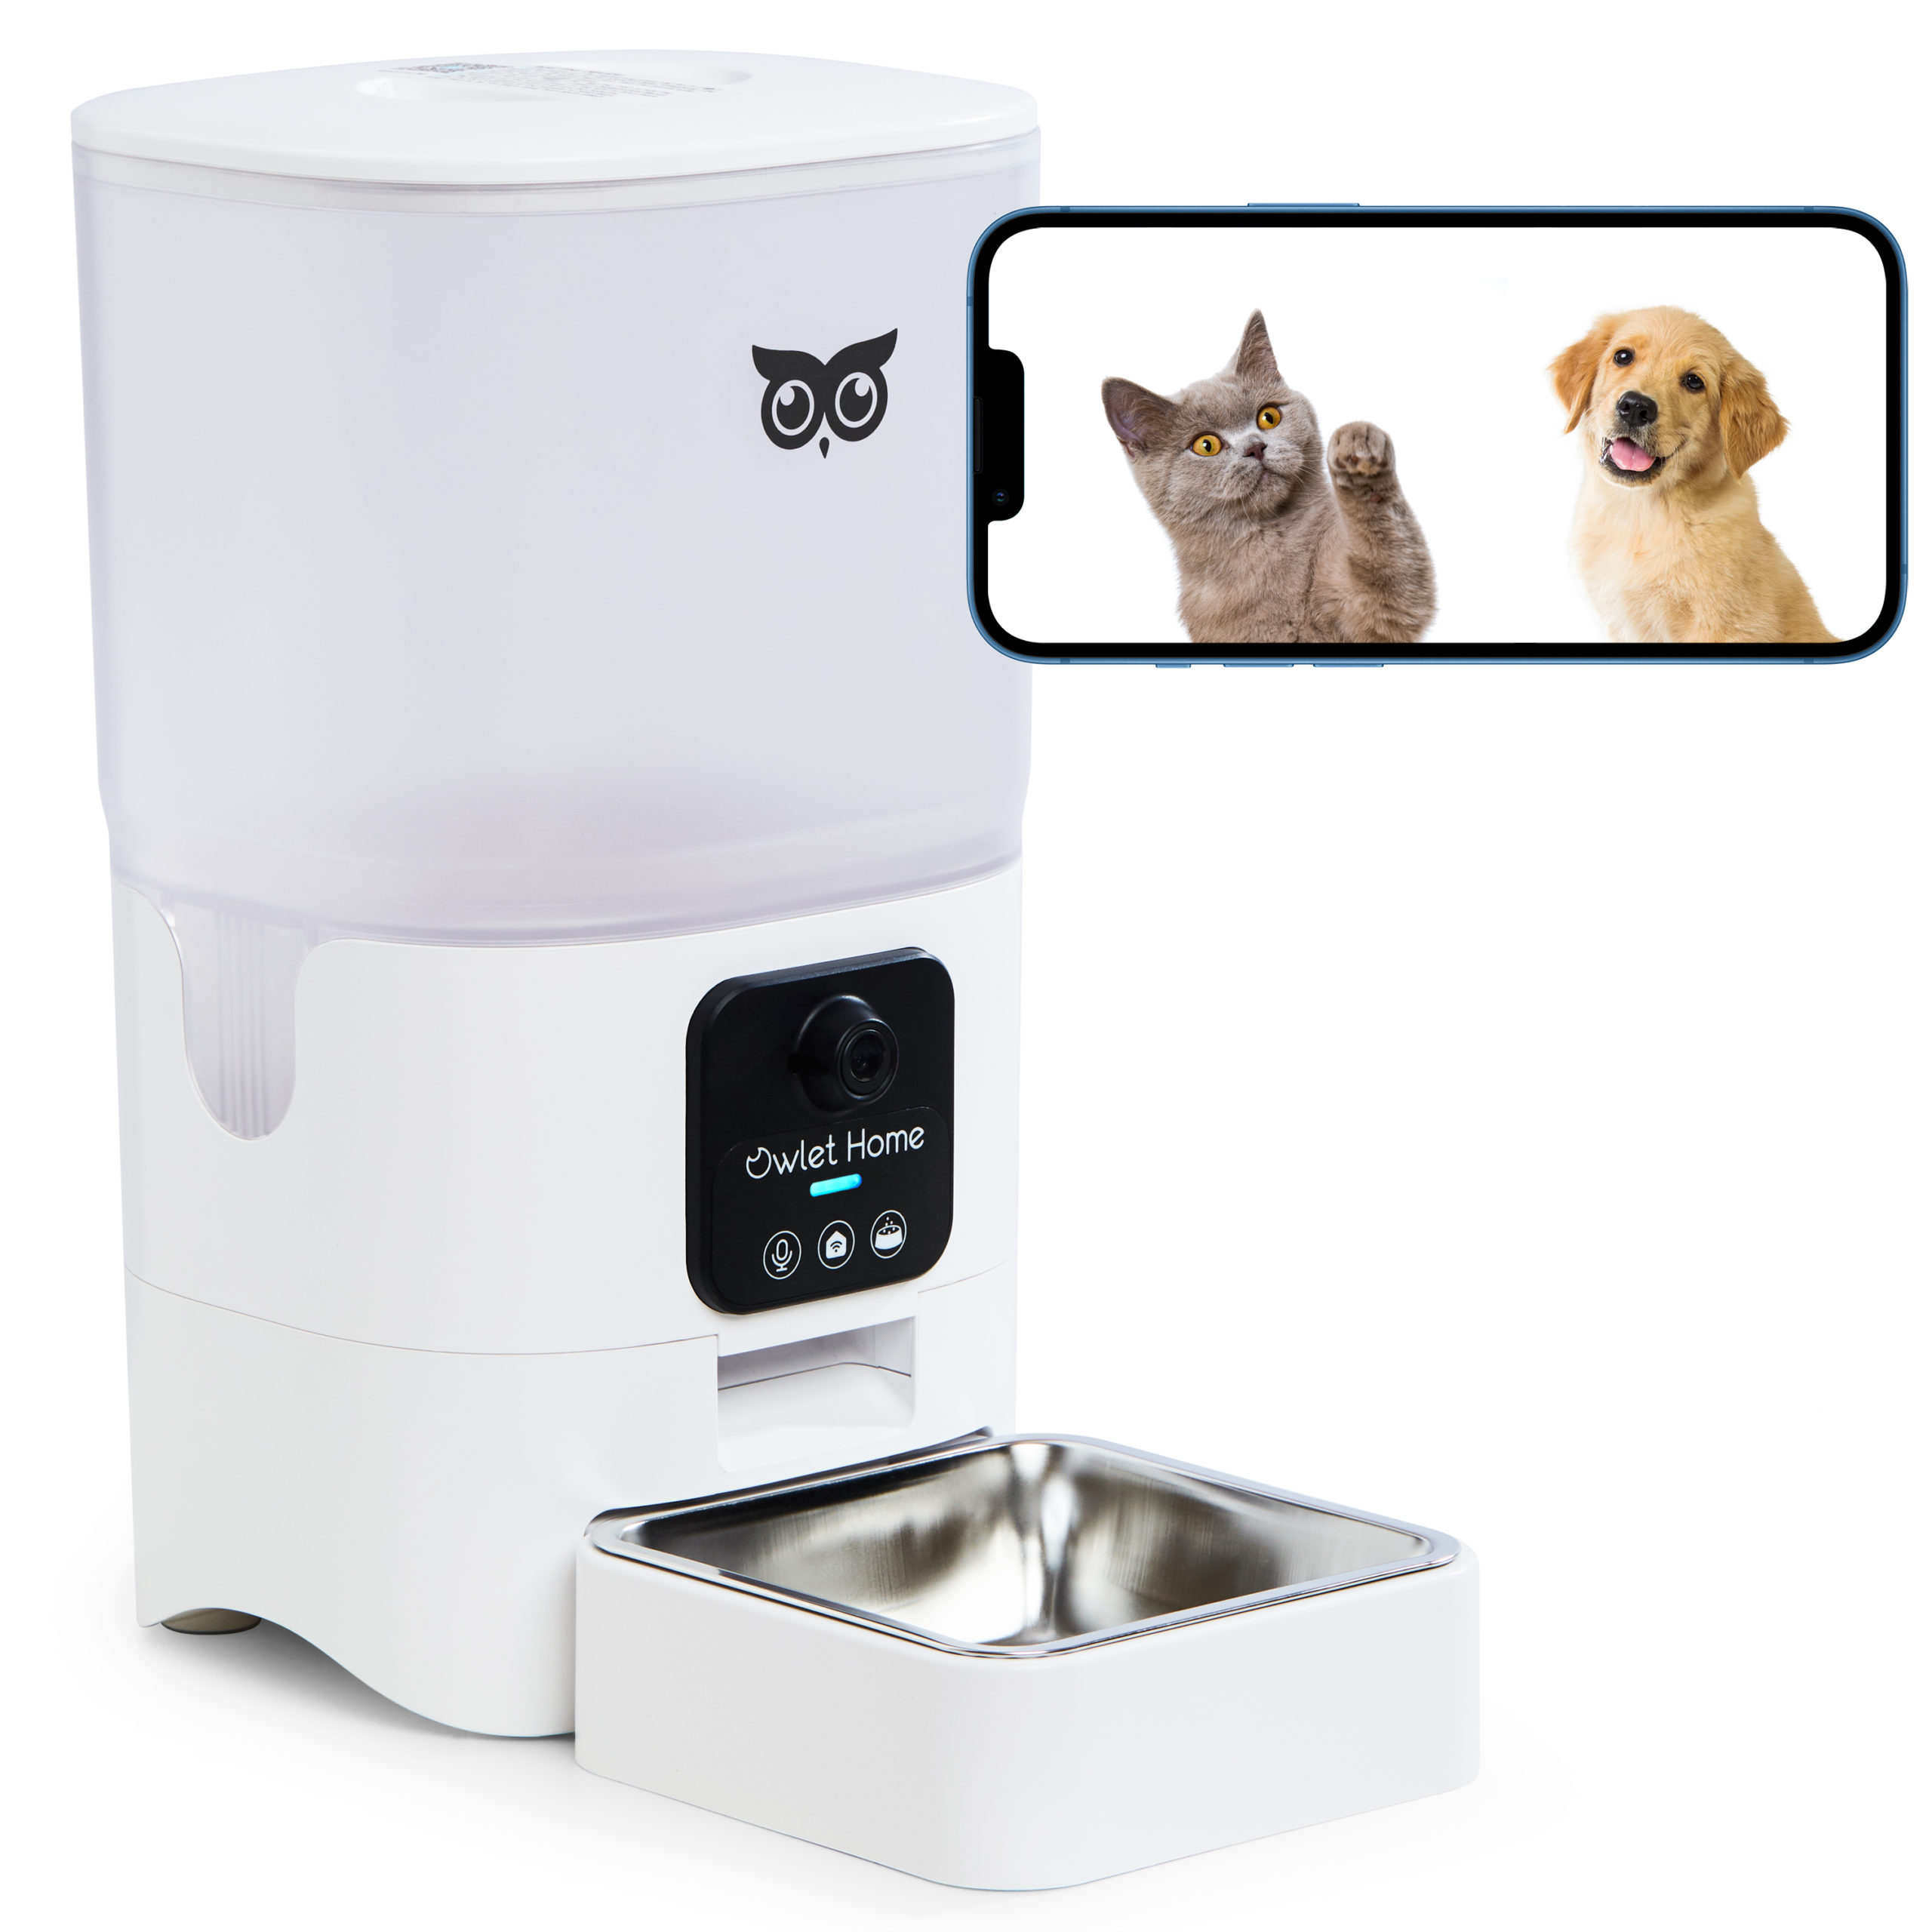 Owlet Home Smart Automatic Pet Feeder with 1080P HD Camera for Cats & Dogs  (6L), WiFi(&5GHz), Live Video, Auto Night Vision, 2-Way Audio, Works  with Alexa & Google Assistant, Motion Alert, No